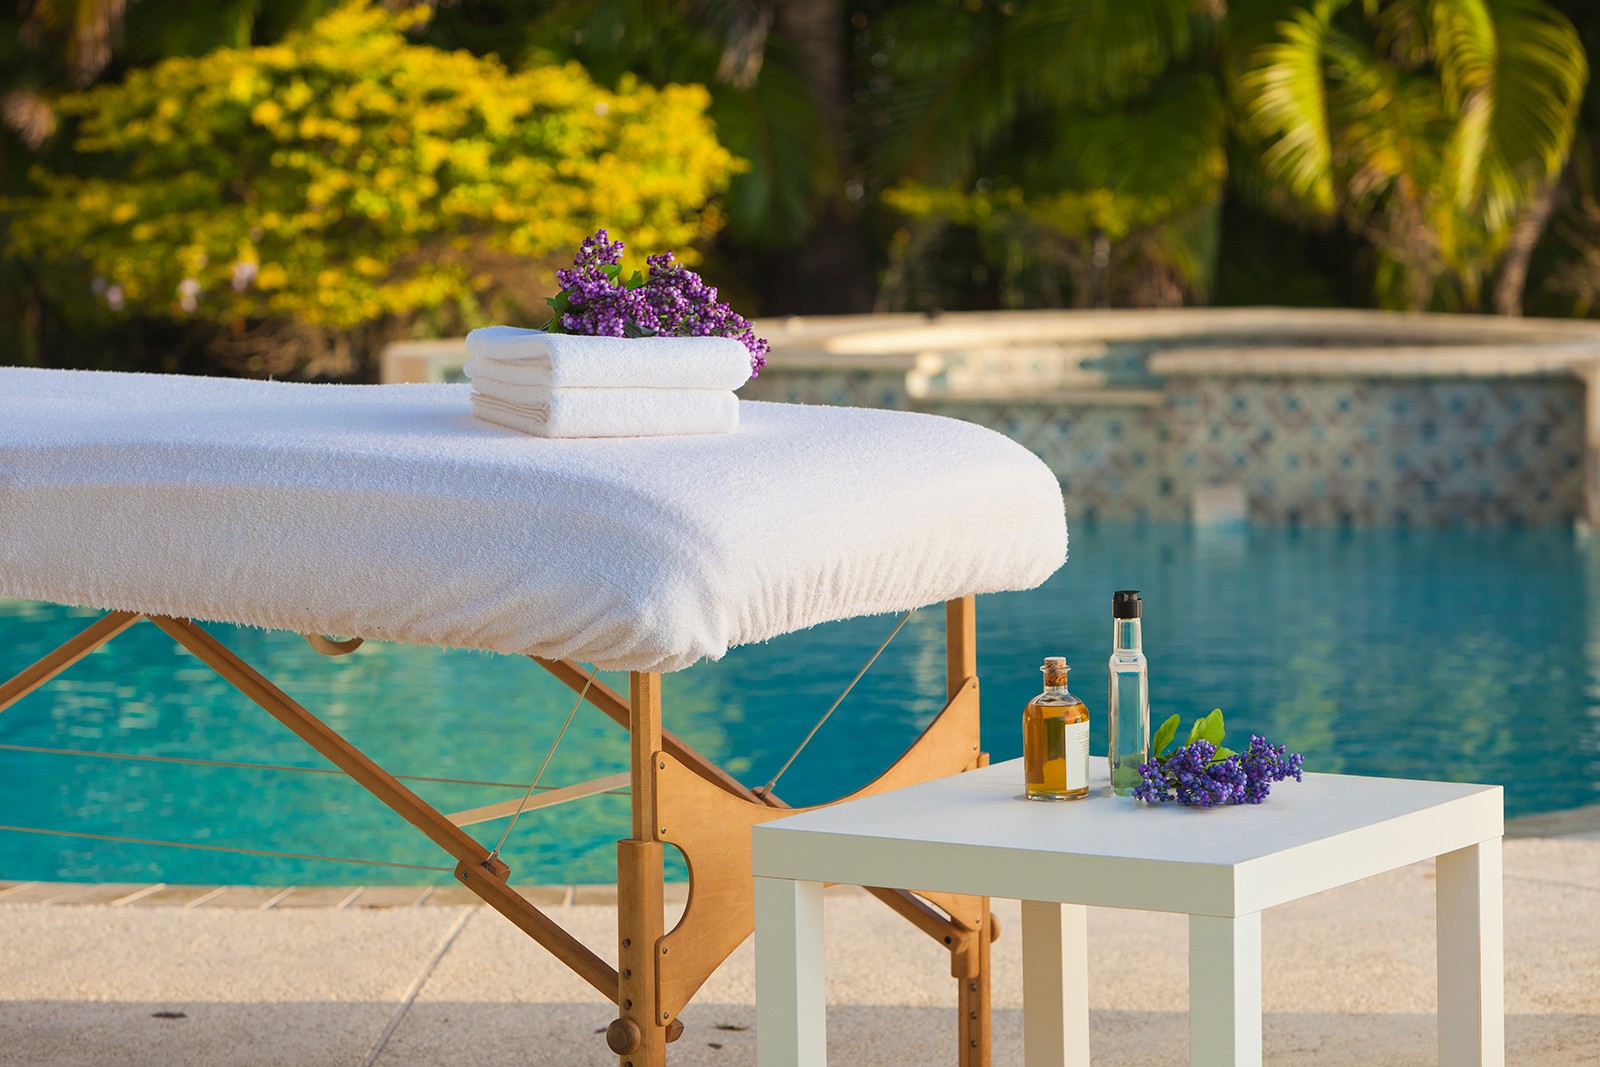 Massage table in front of the pool at Cliffside Malibu, an addiction treatment center in Malibu, California.